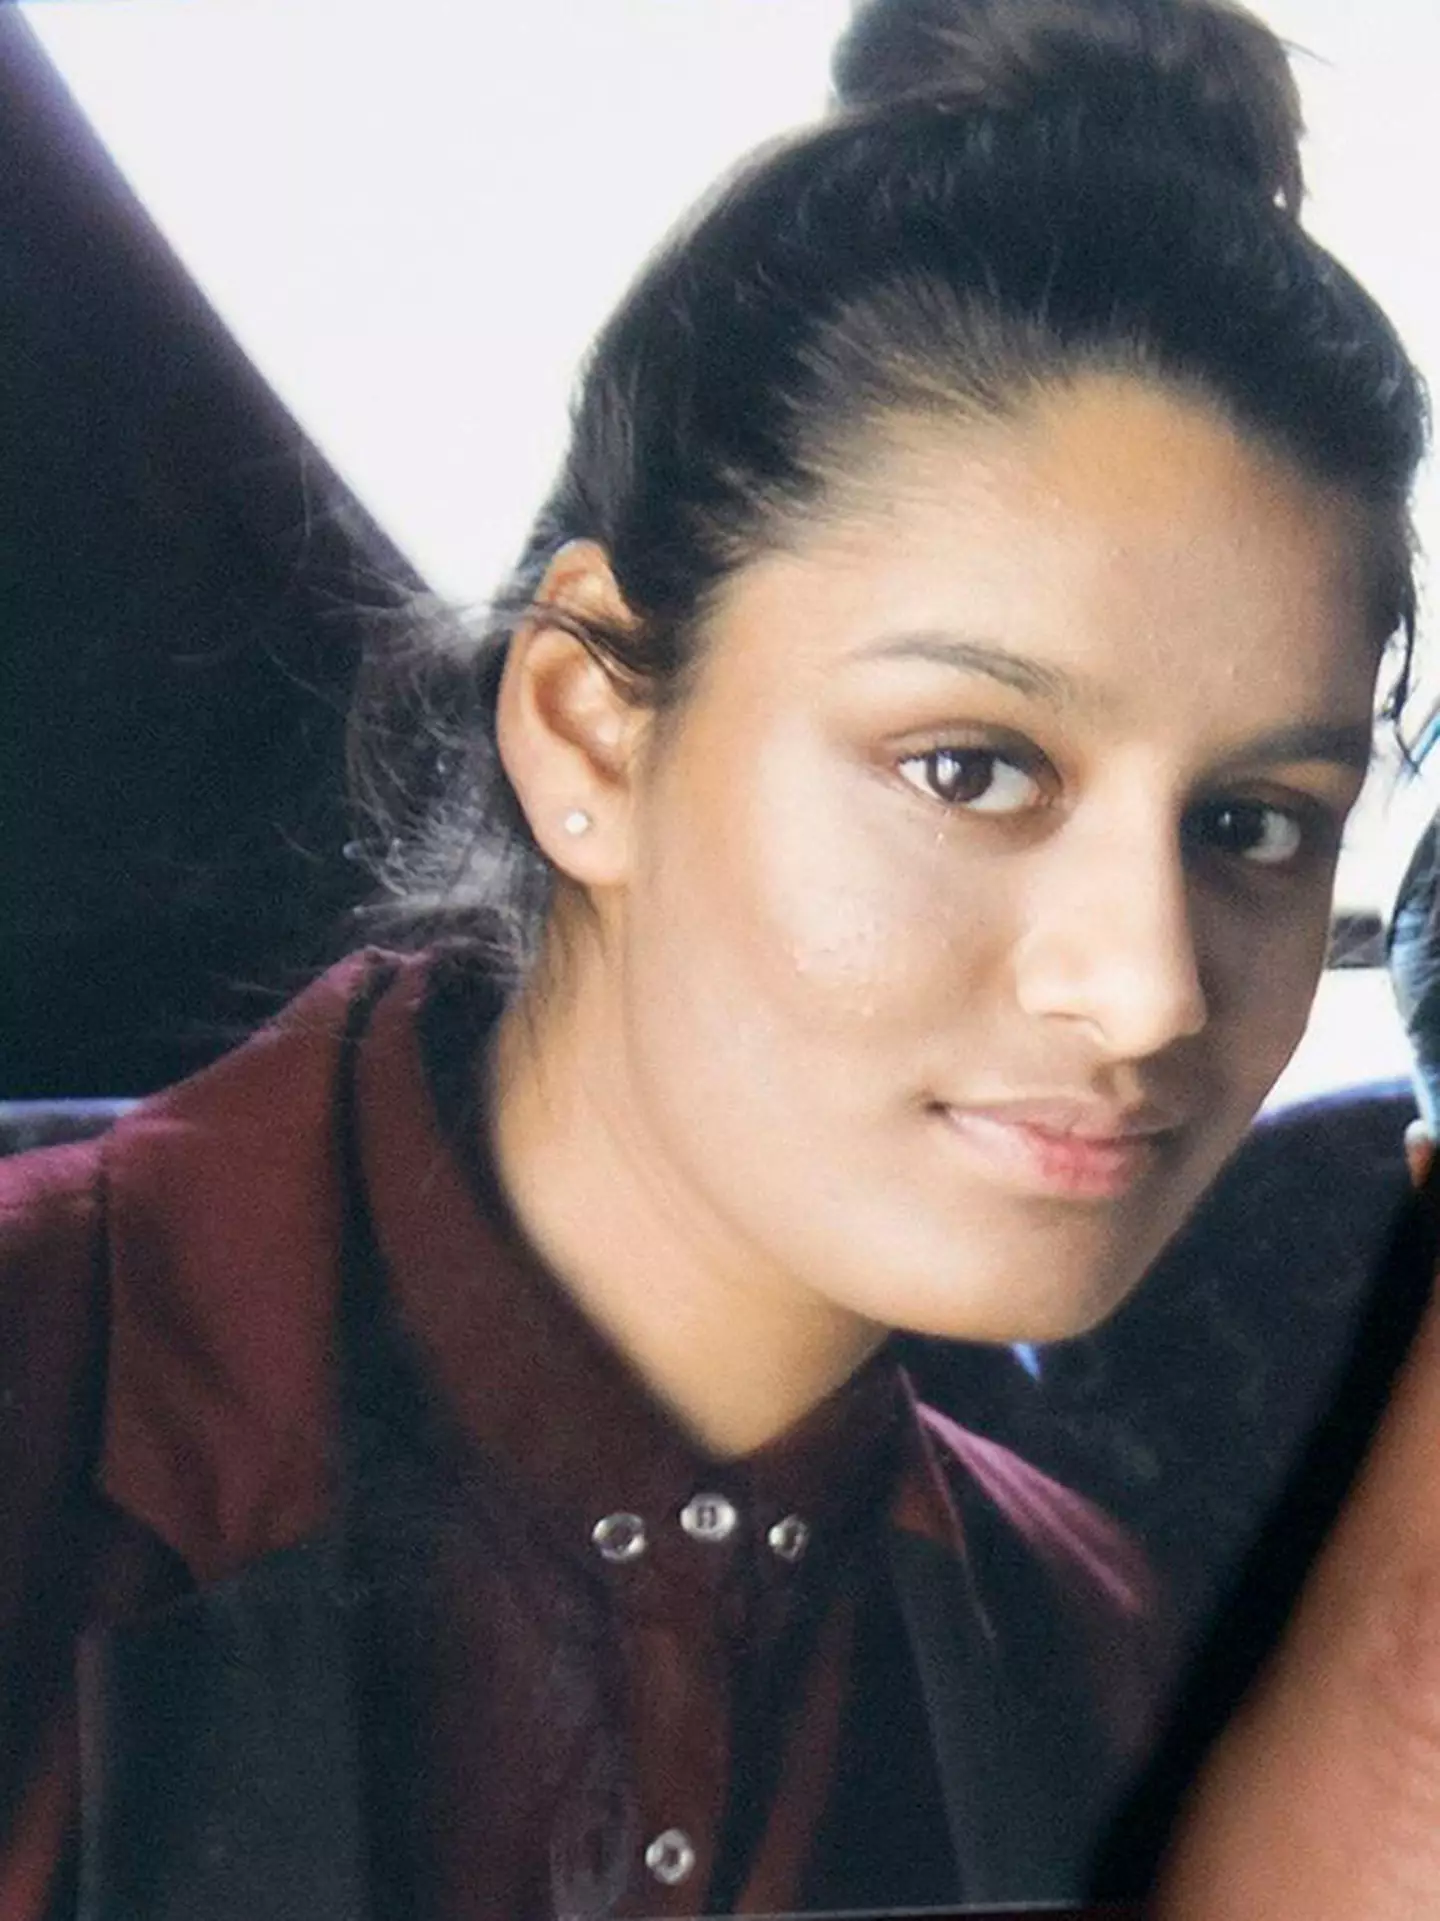 Shamima Begum fled the UK to join ISIS in 2015, when she was 15-years-old.